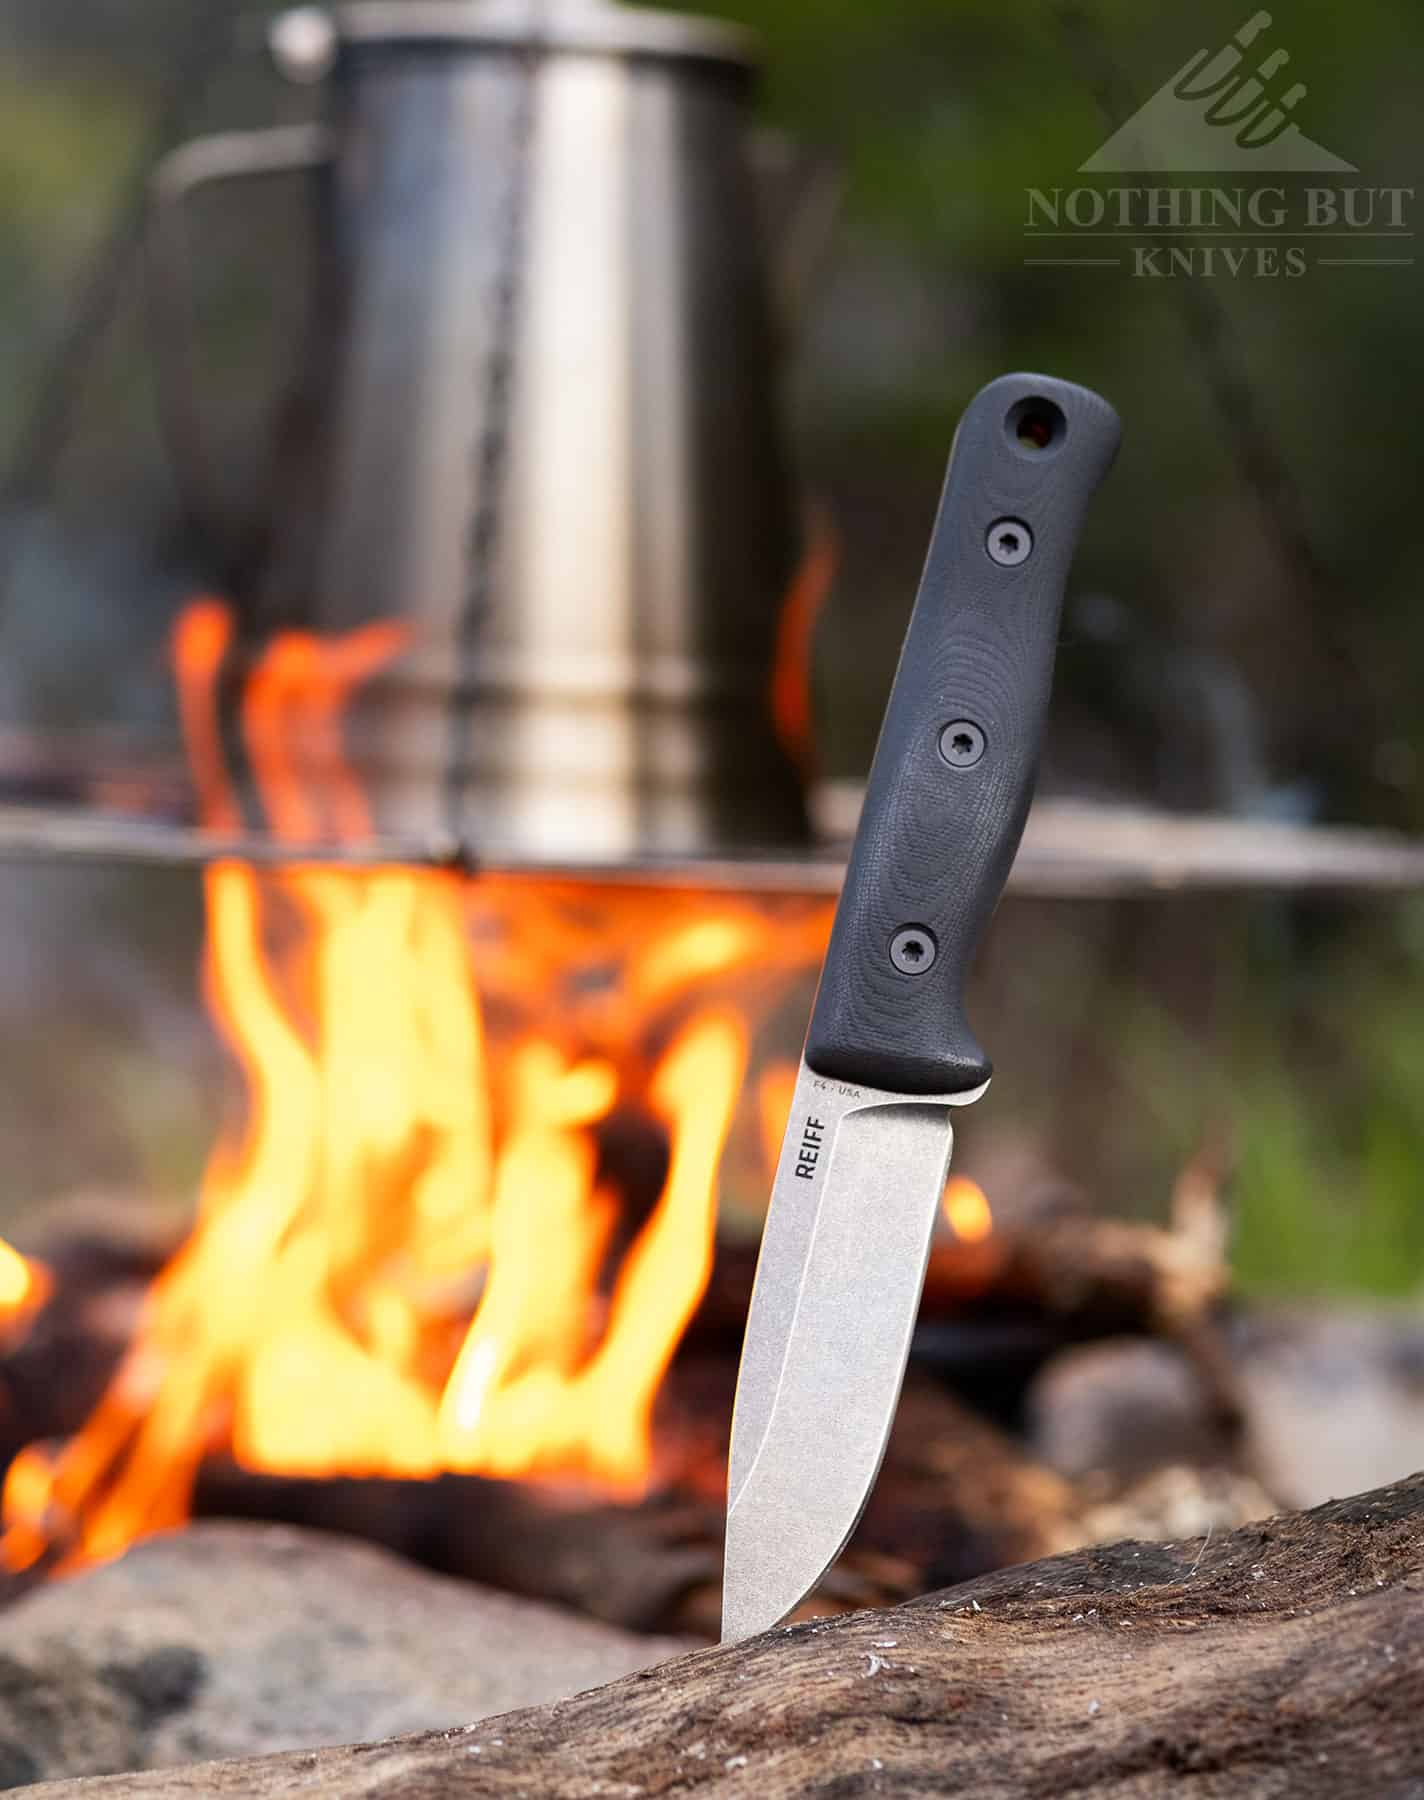 The Reiff F4 is an excellent gift knife for the survival enthusiast on your Christmas list. 